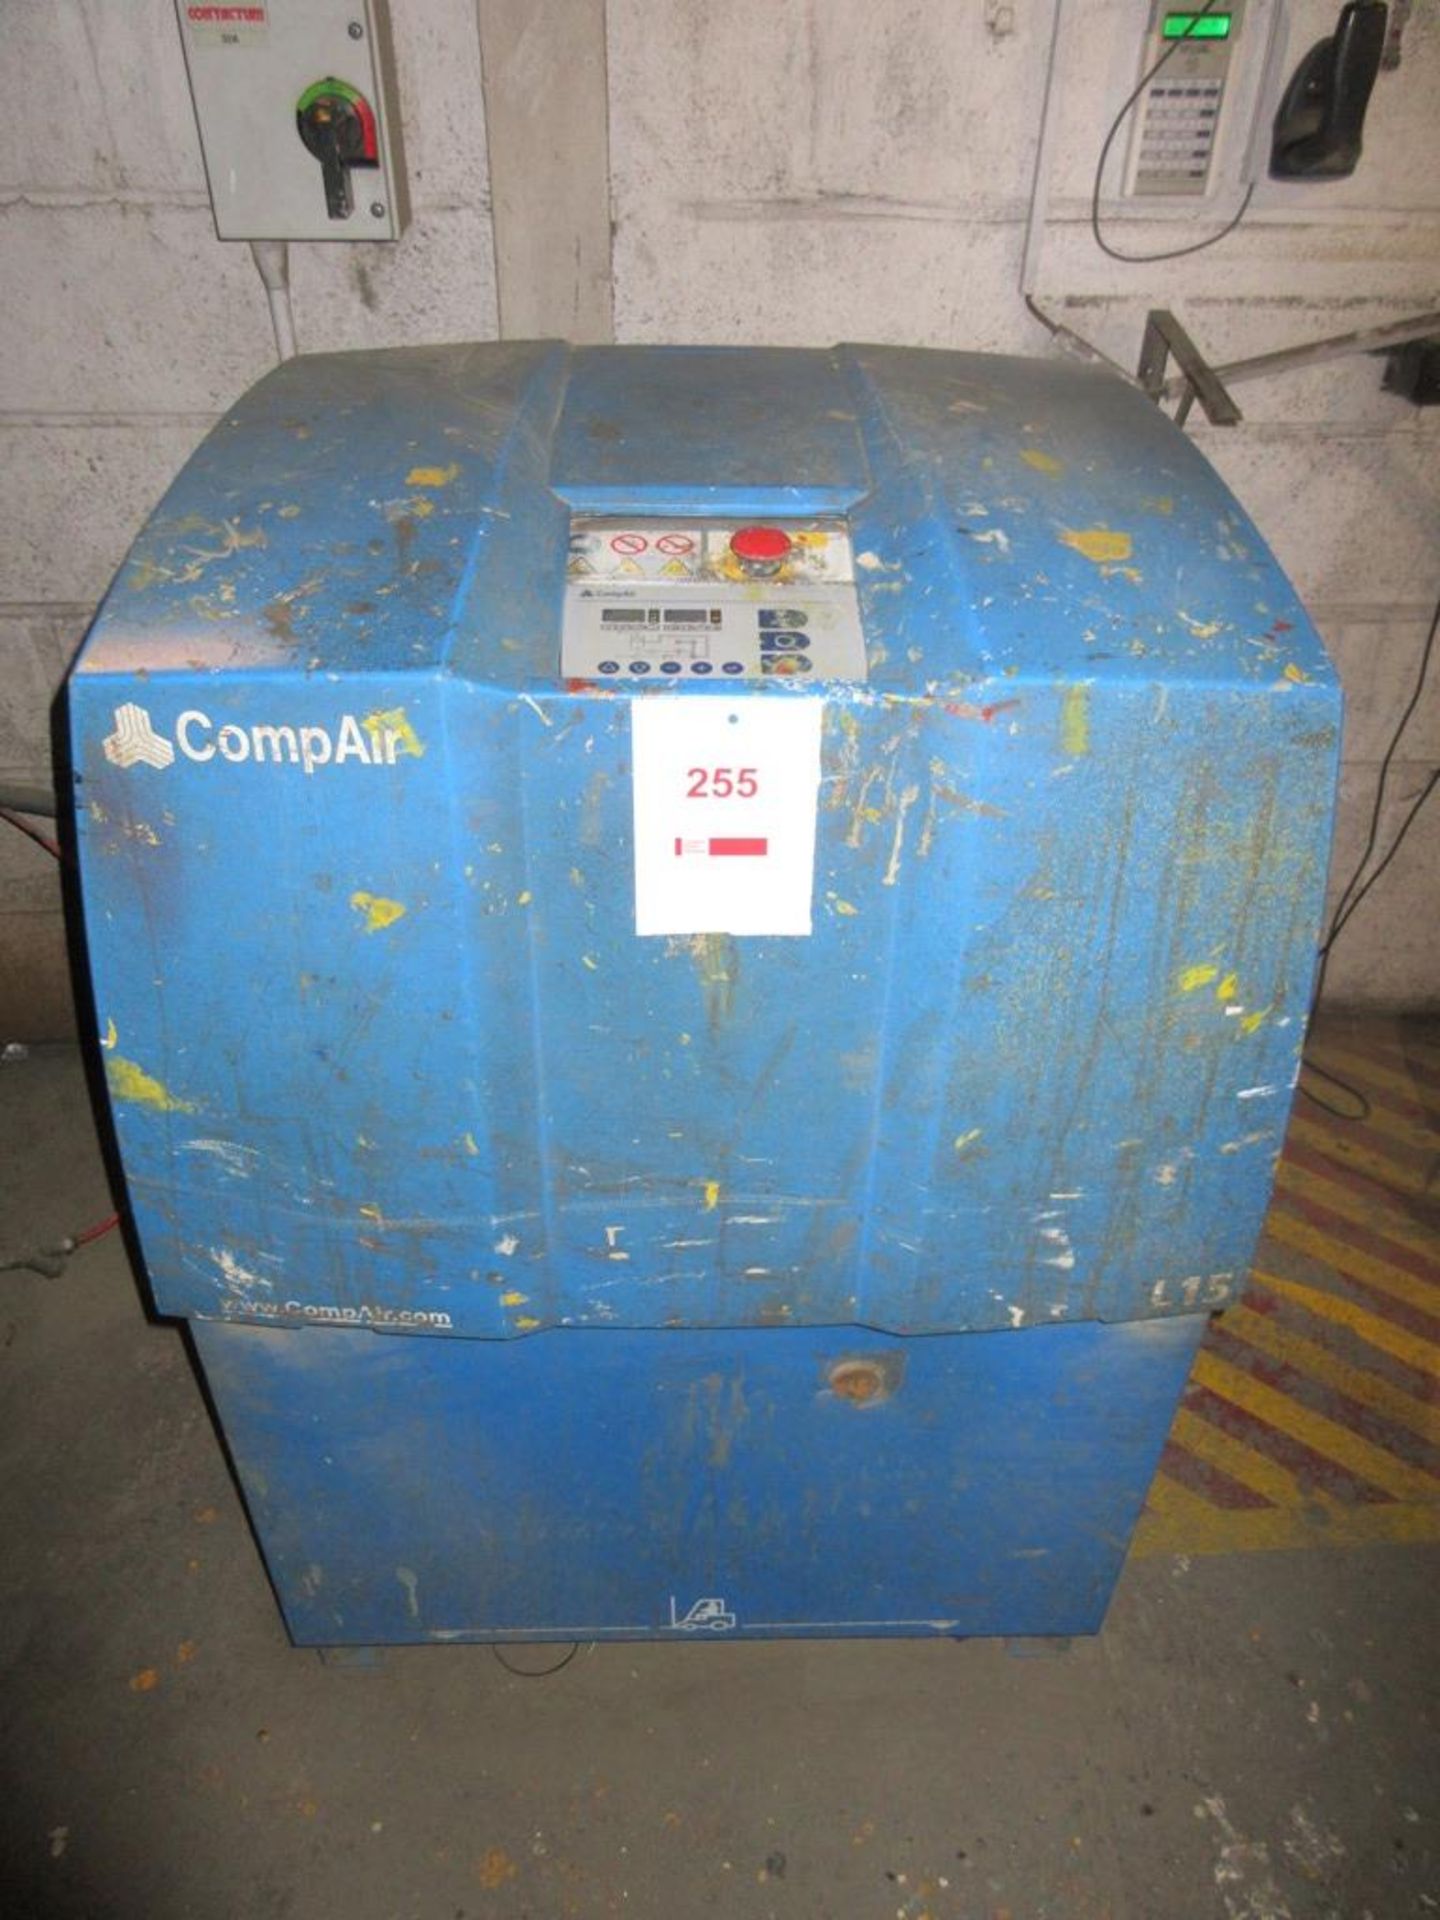 COMPAIR Screw compressor, model L15-7.5, max pressure 7.5Bar, (2004) with 500 Ltr air receiver & dry - Image 2 of 3